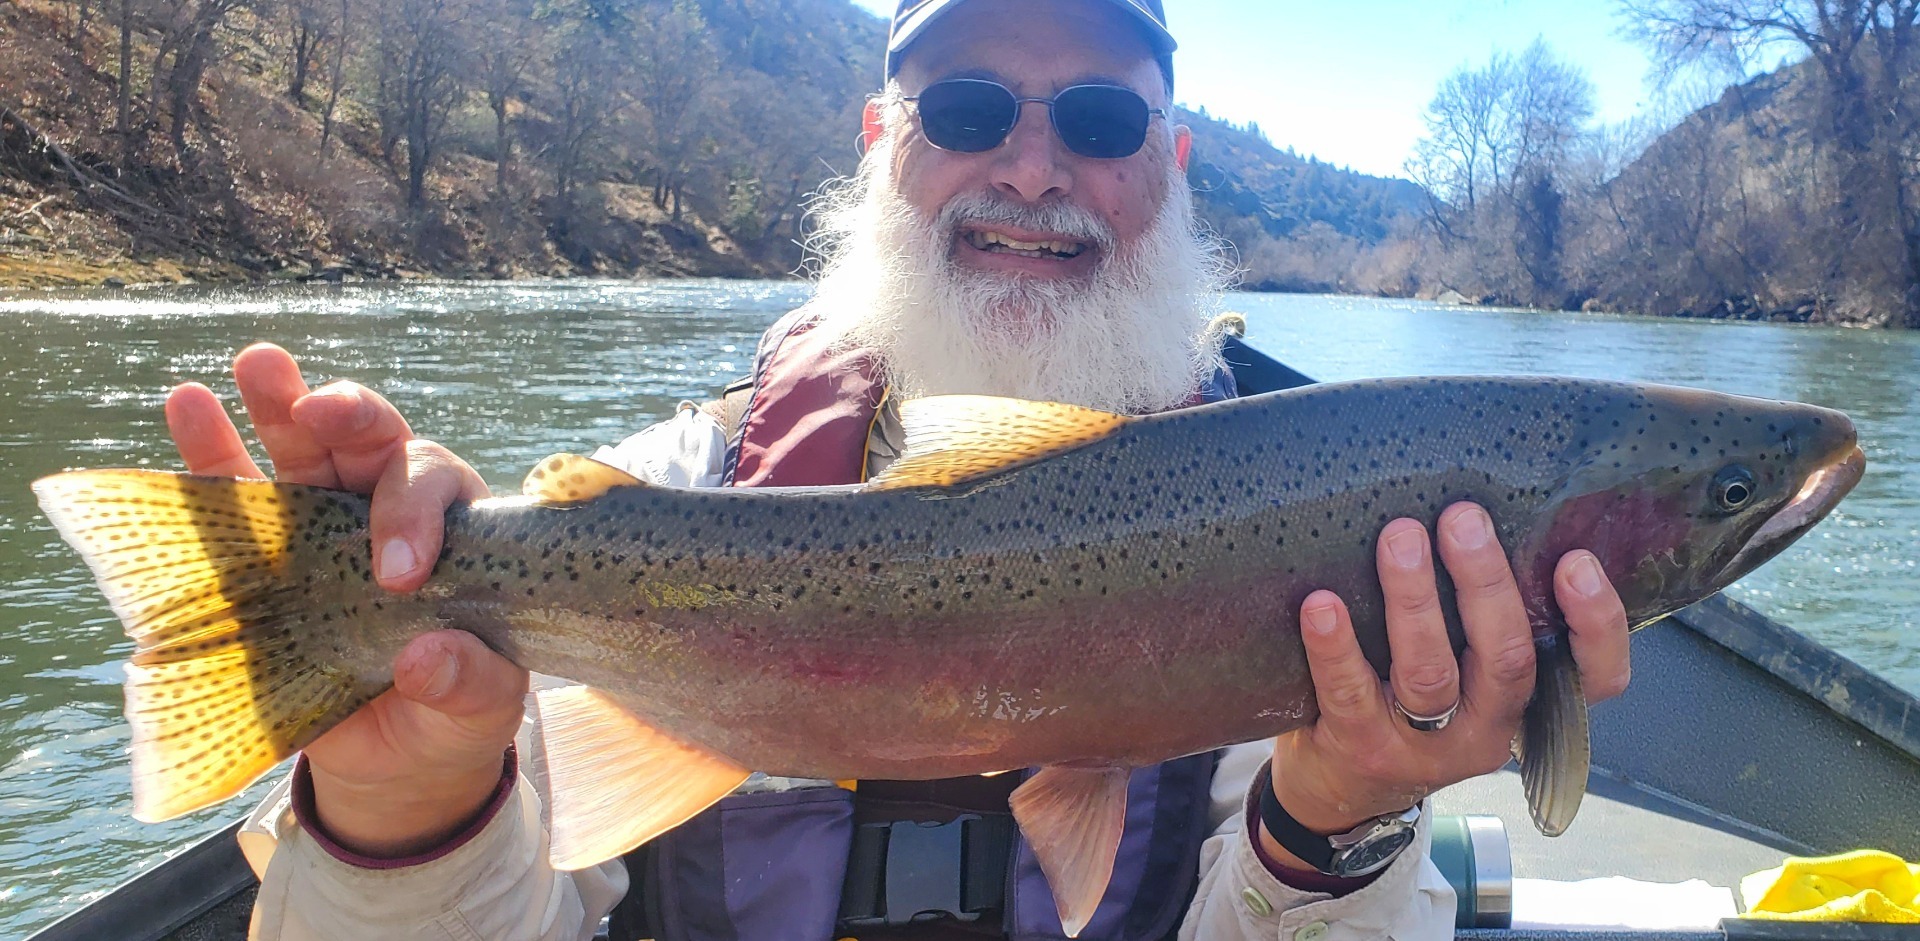 27 inch Klamath Steely smiles are the best!